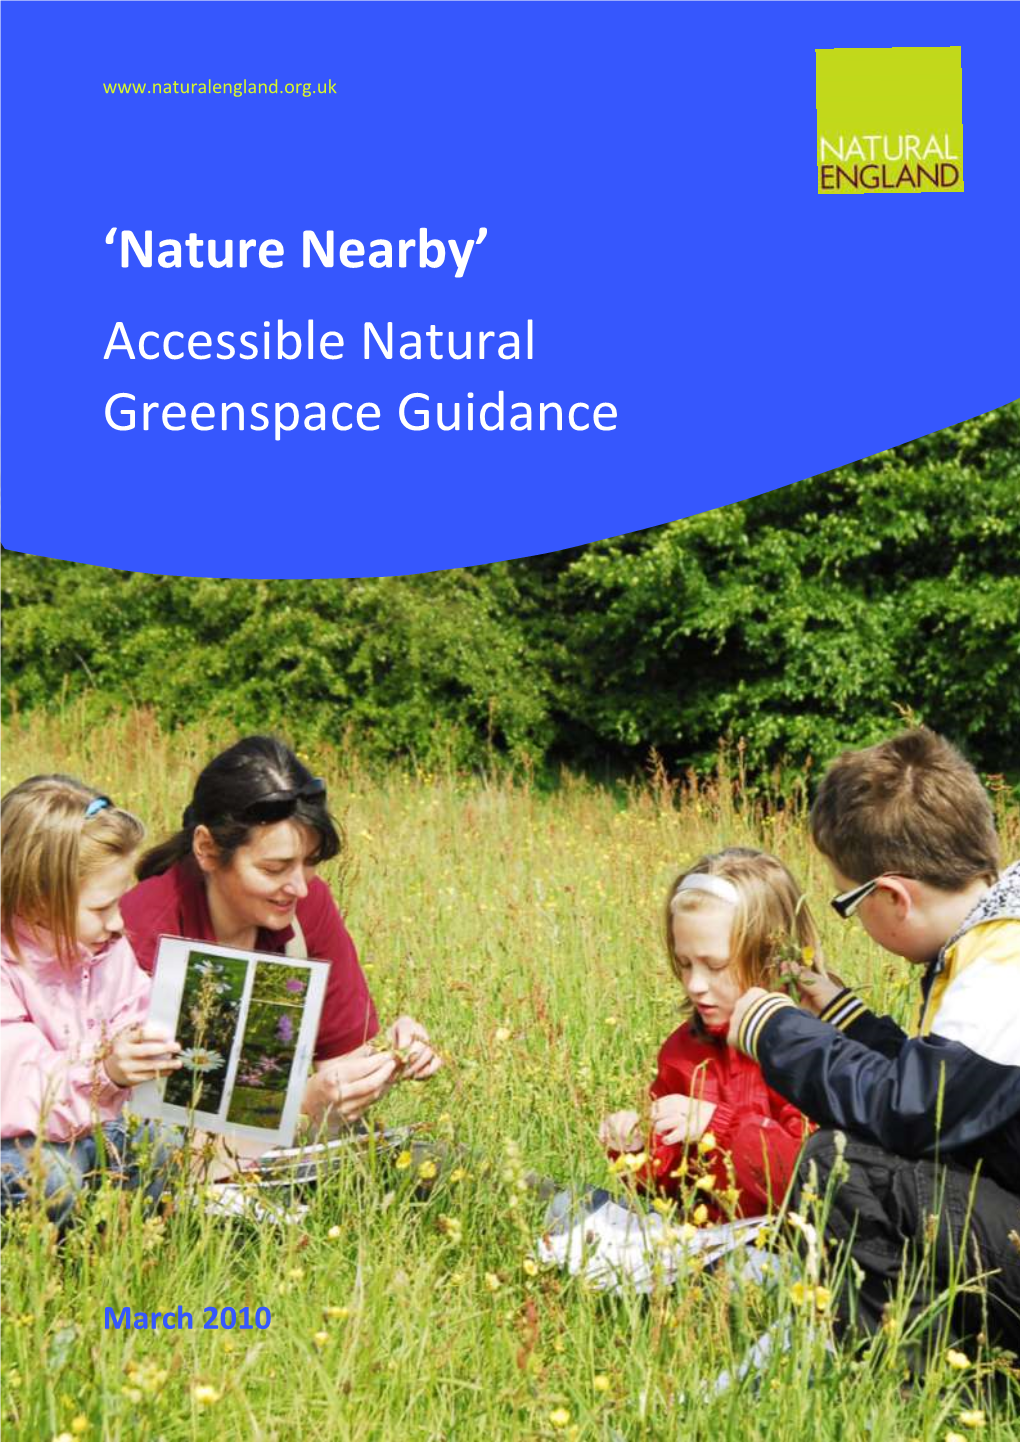 Nature Nearby’ Accessible Natural Greenspace Guidance